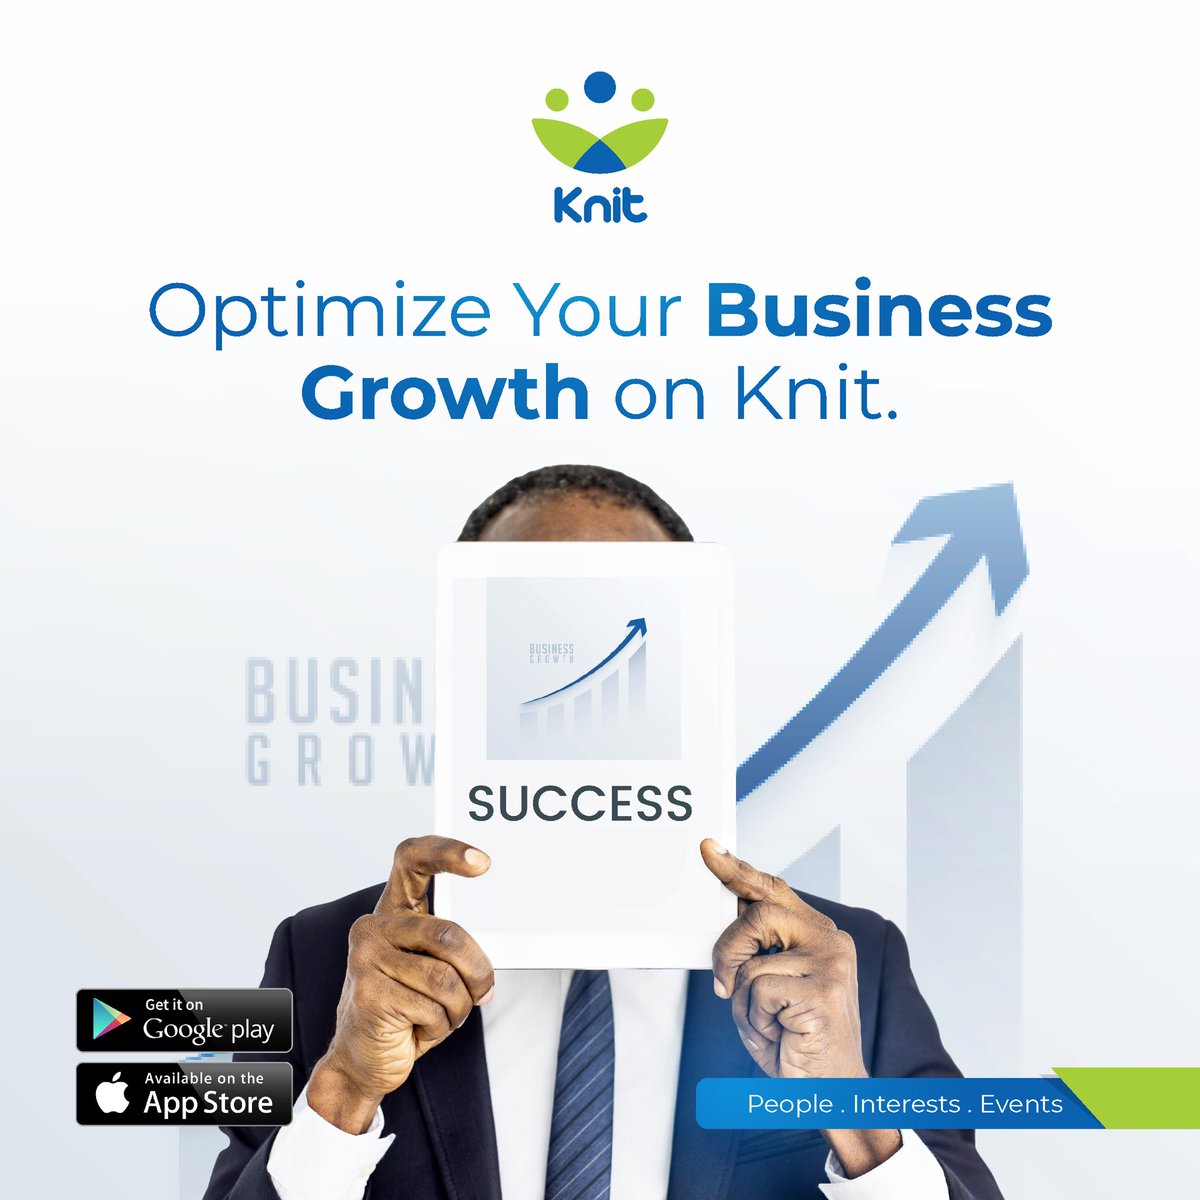 Maximize your business's potential with Knit to connect more with your target audience.

Available for download on iOS and Android

For iPhone Users: bit.ly/knitapp-ios

For Android Users: bit.ly/theknitapp

#knit #business #promotions #knittechapp #eventlisting